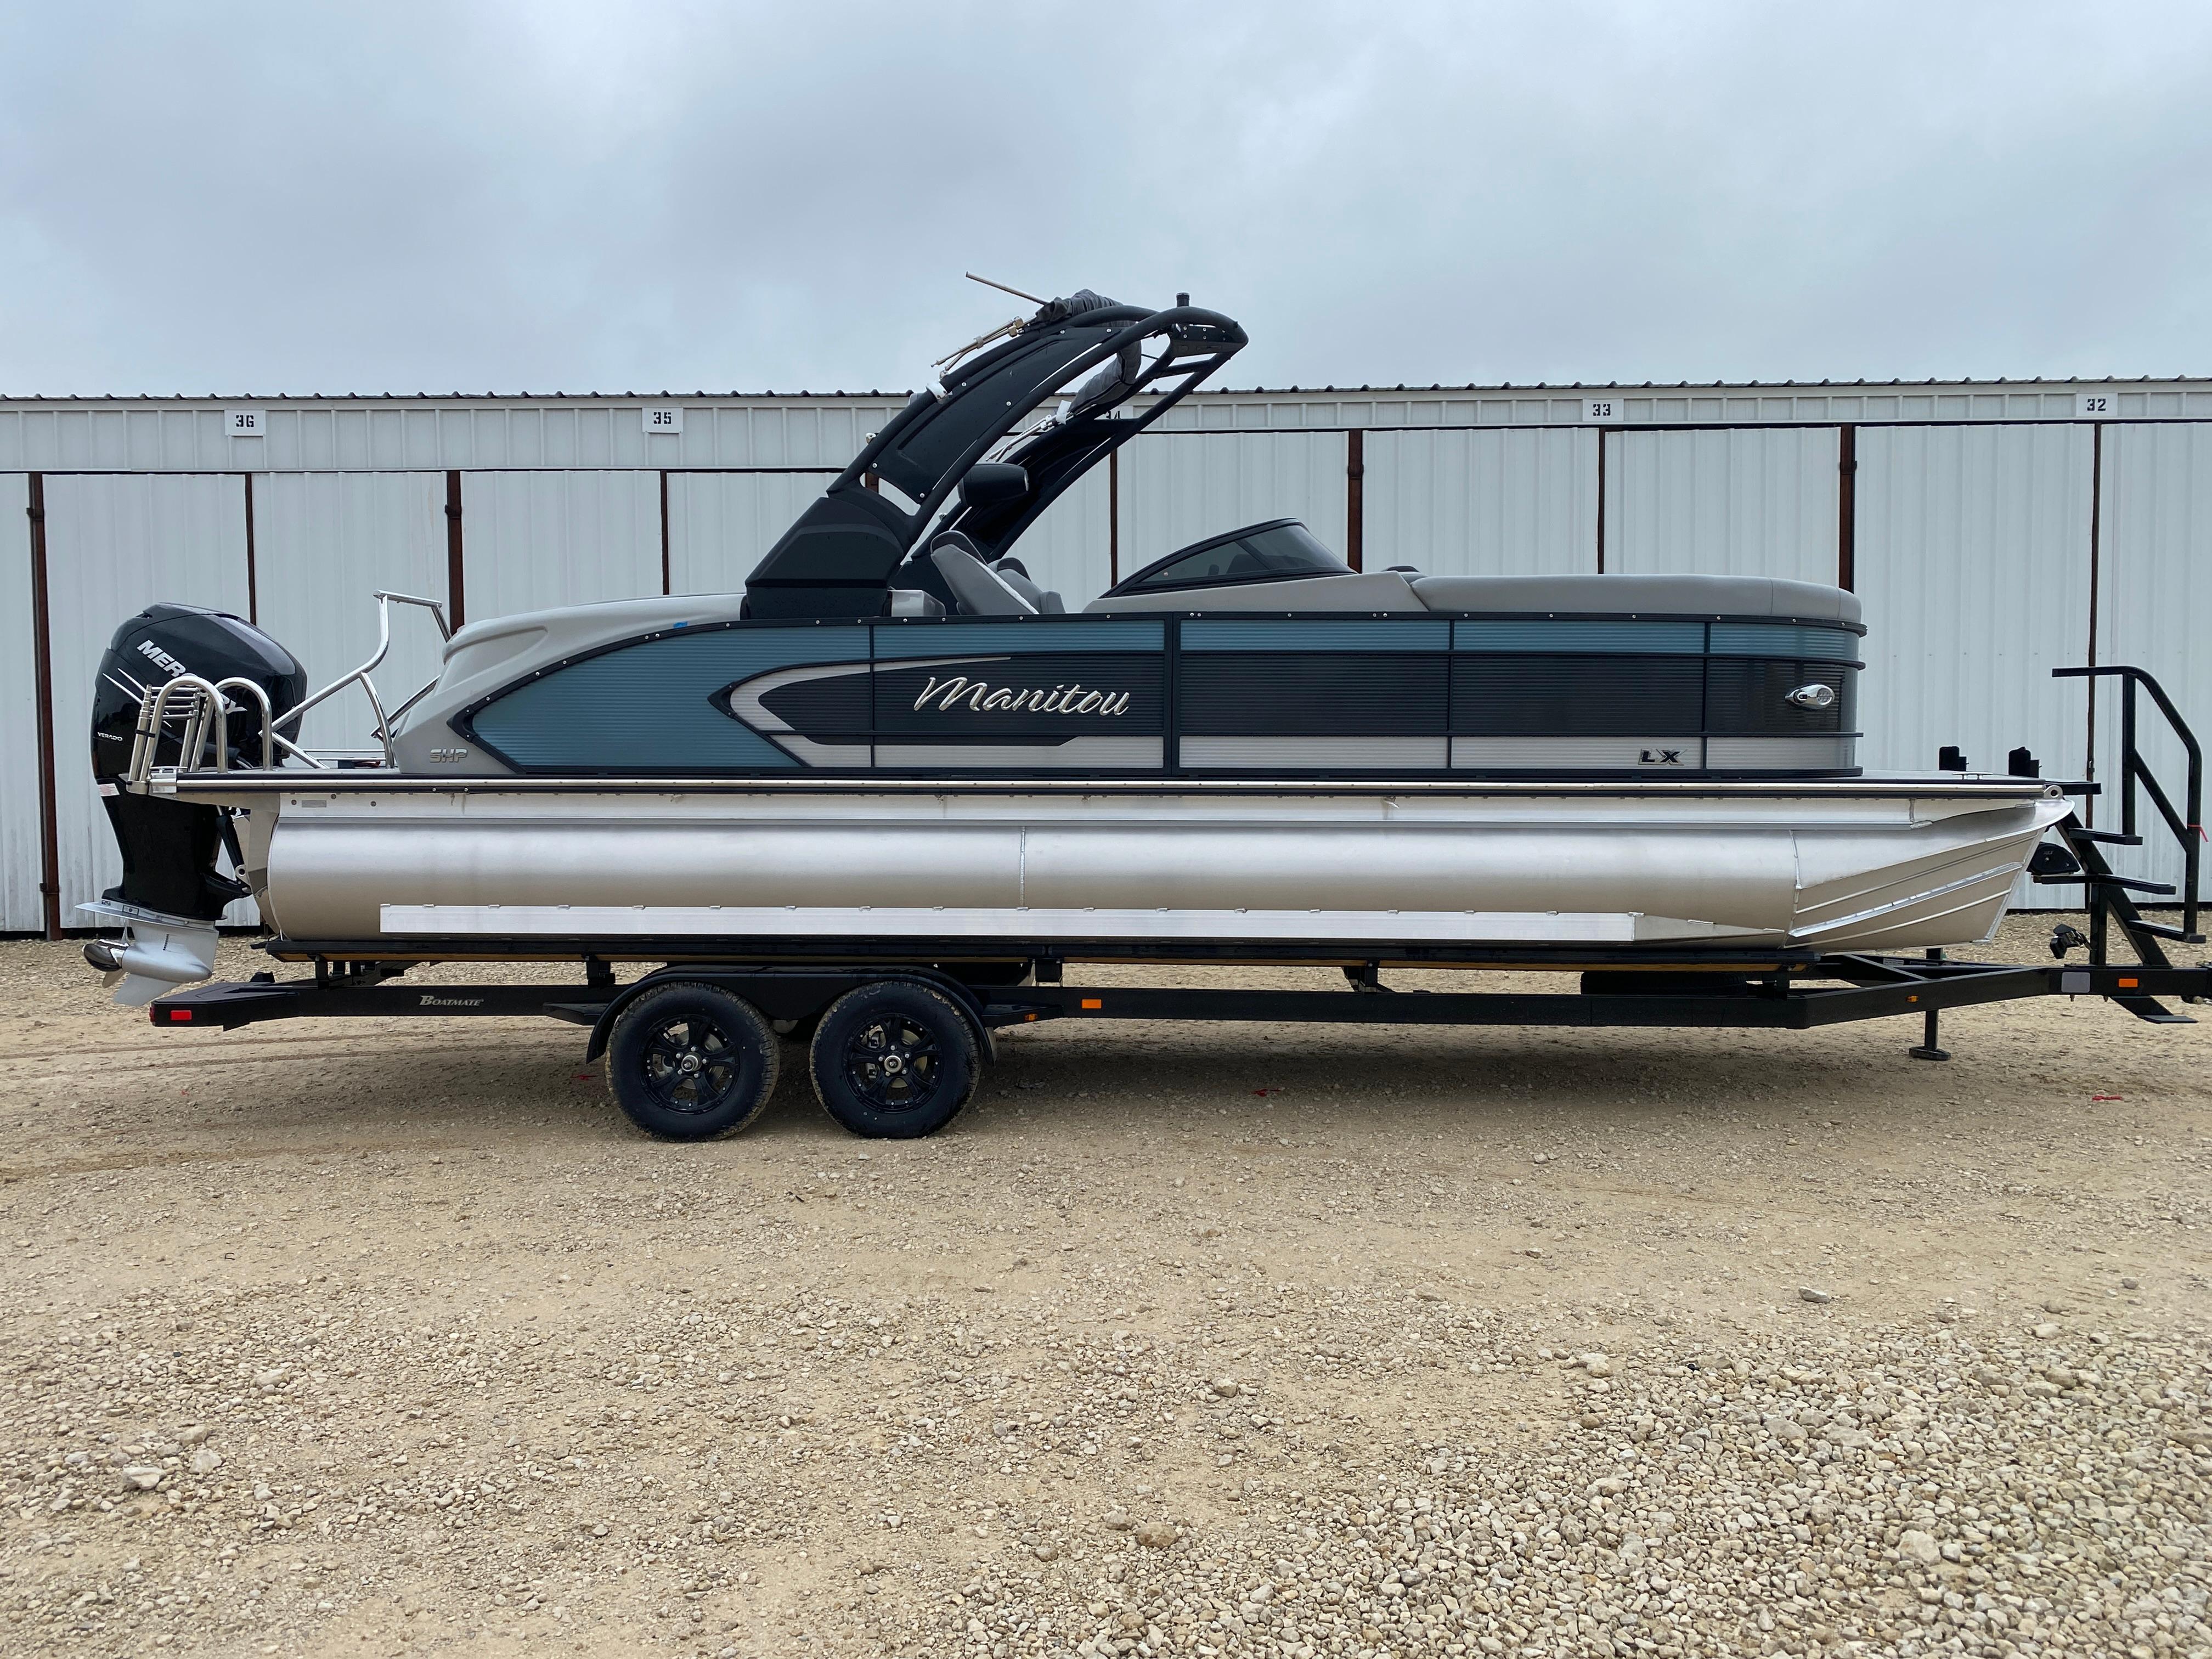 Page 10 of 239 - Boats for sale in Oklahoma - boats.com